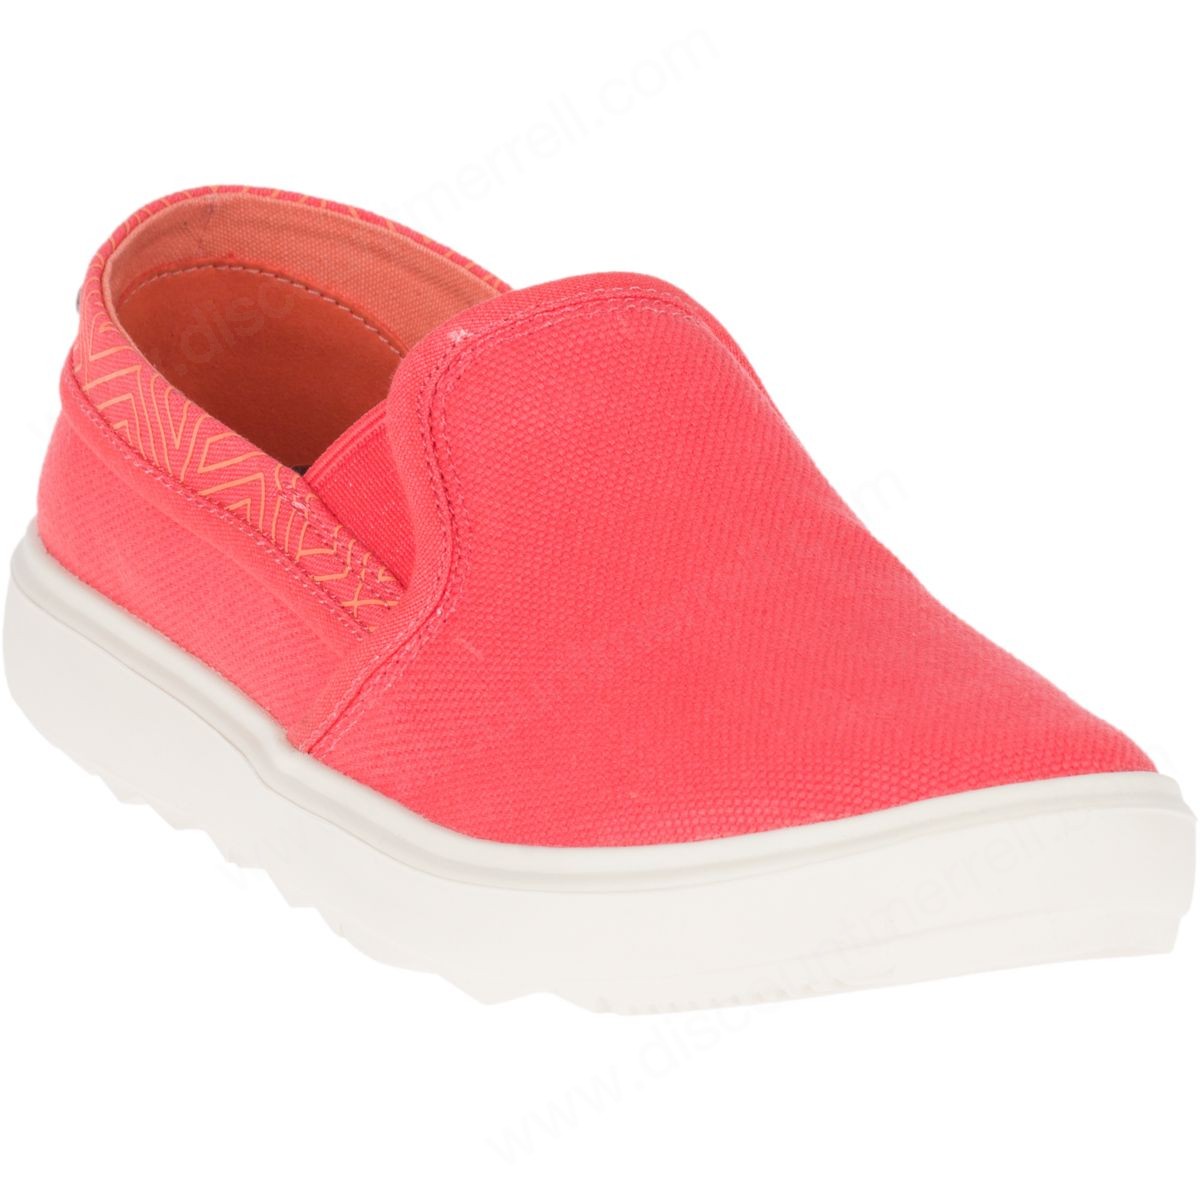 Merrell Woman's Around Town City Moc Canvas Hot Coral - -3